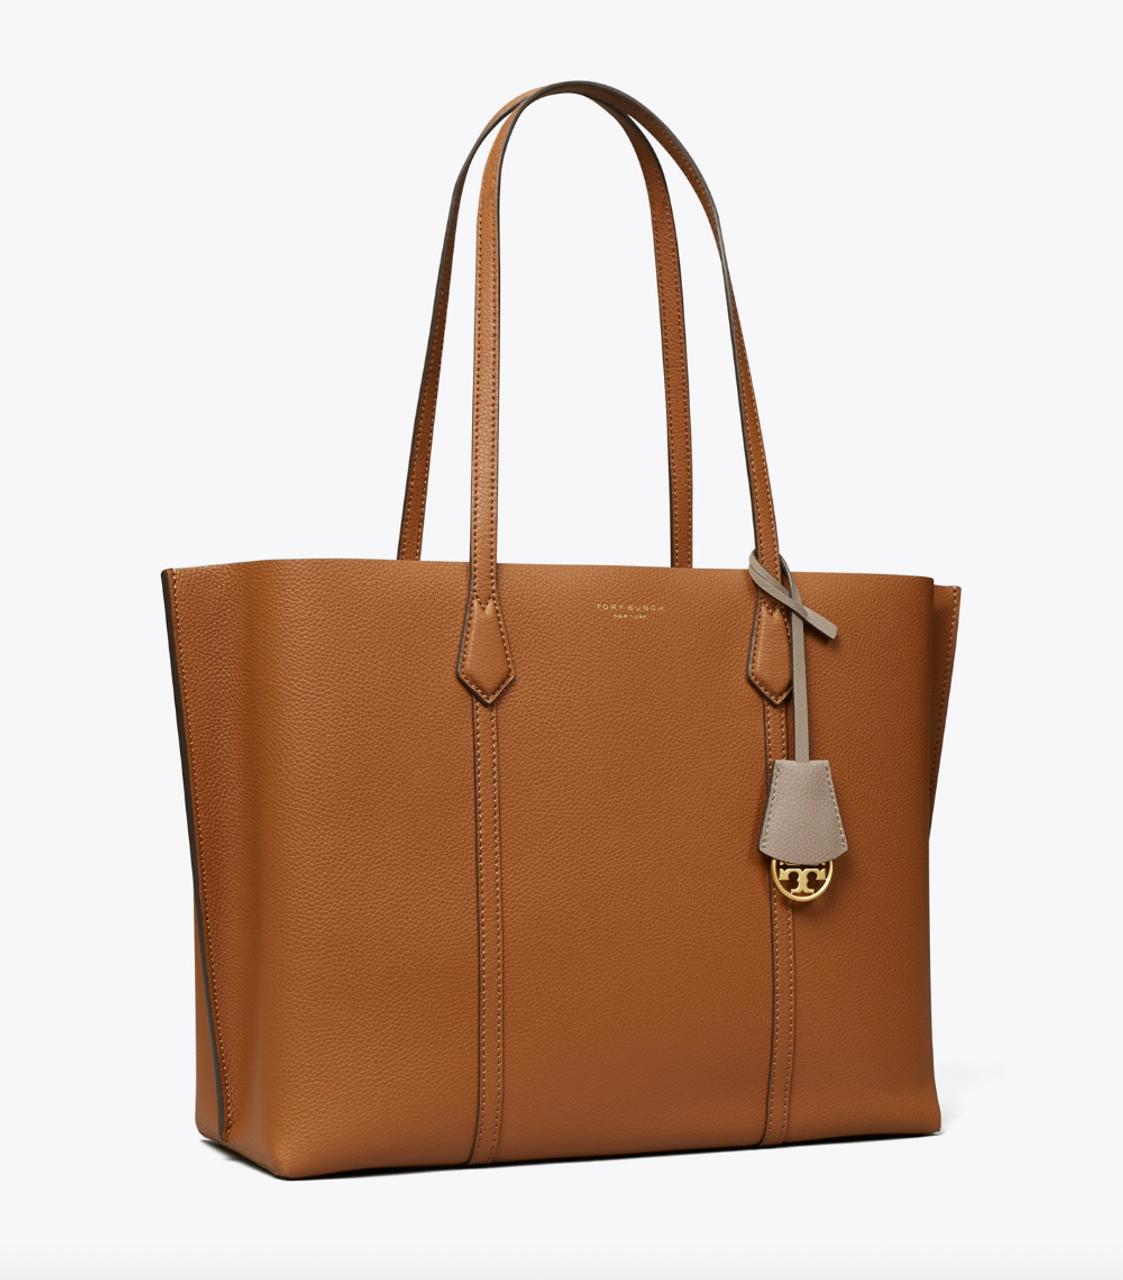 Tory Burch PERRY TRIPLE COMPARTMENT TOTE - Tote bag - light umber